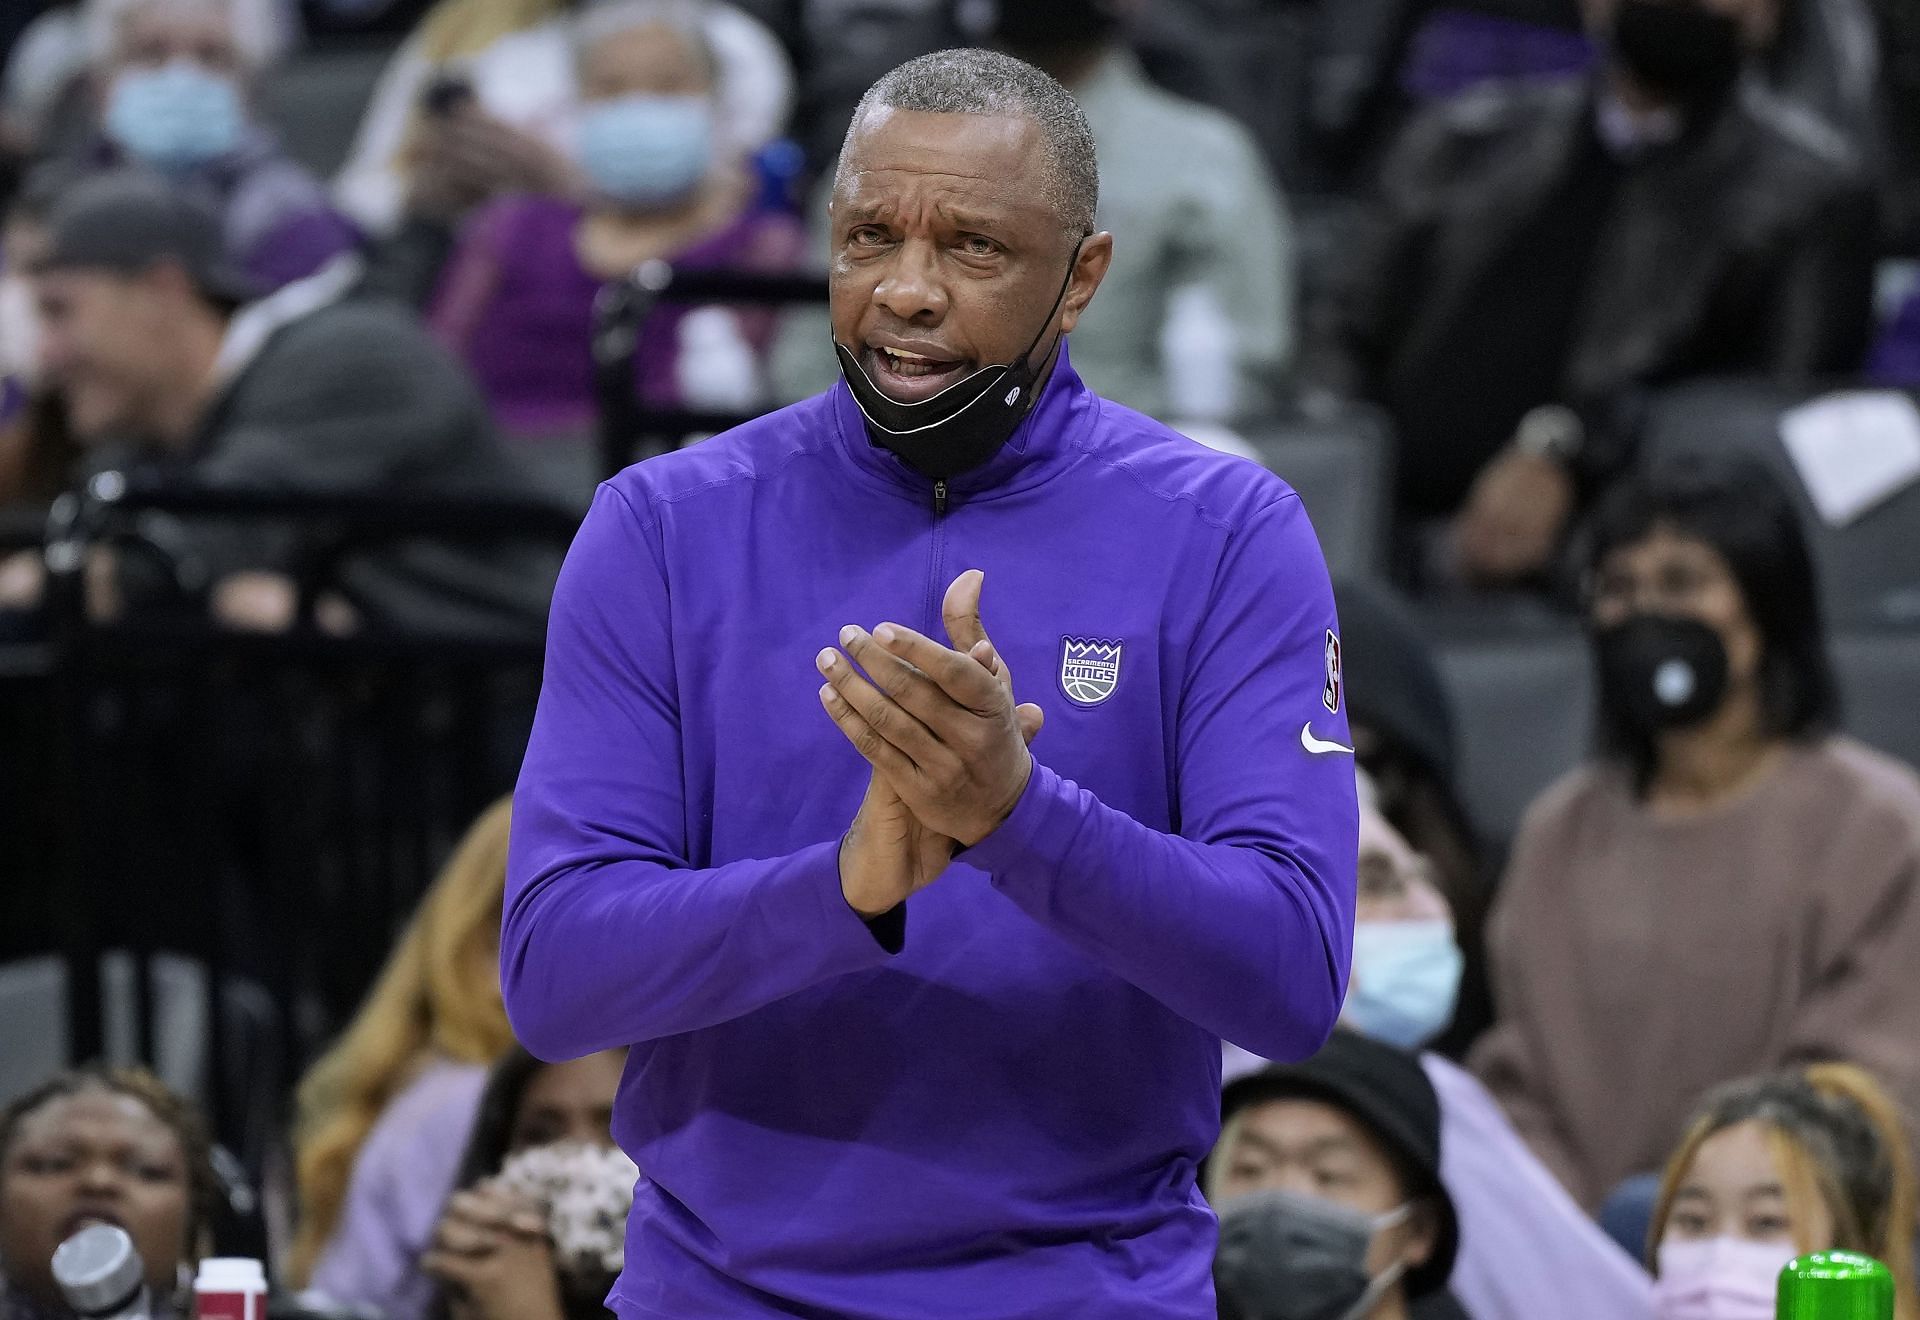 Sacramento Kings coach Alvin Gentry cleared protocols earlier this week